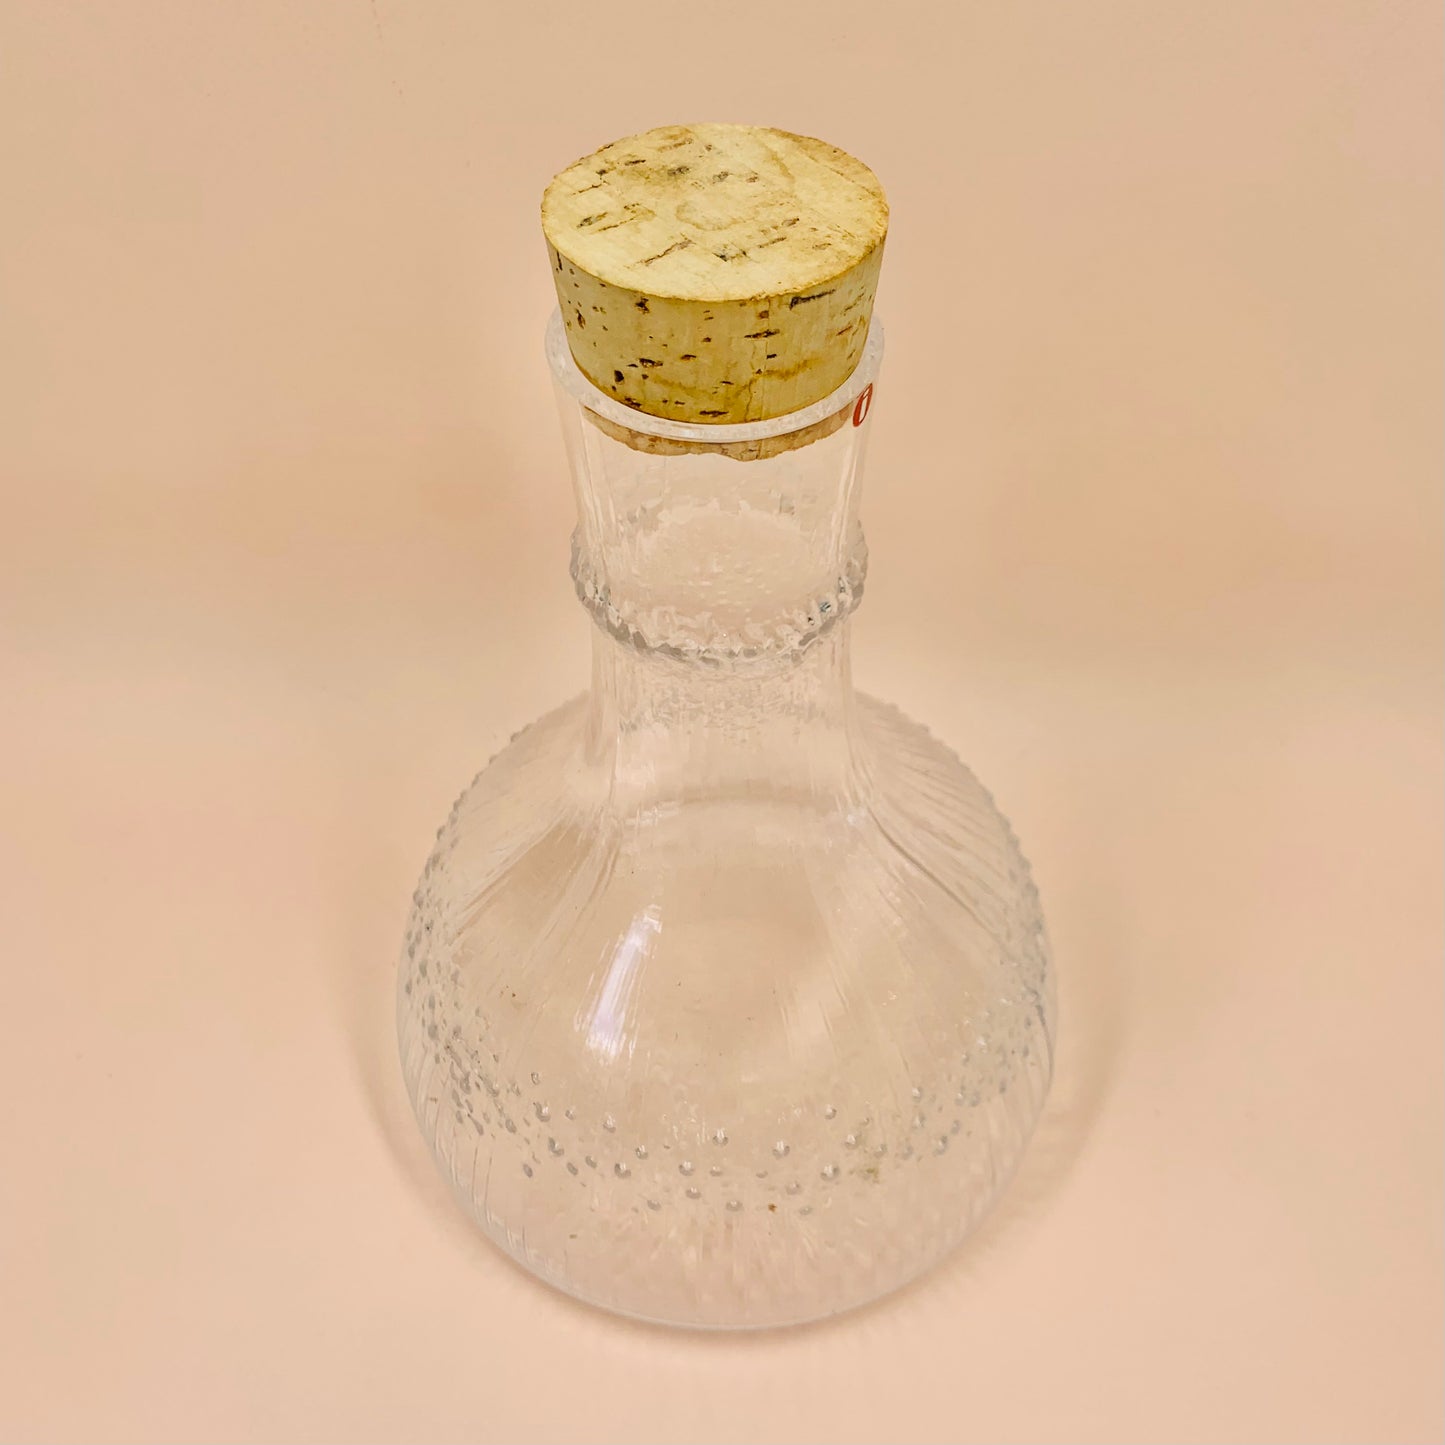 1970s Iittala glass decanter with cork stopper and matching shot glasses